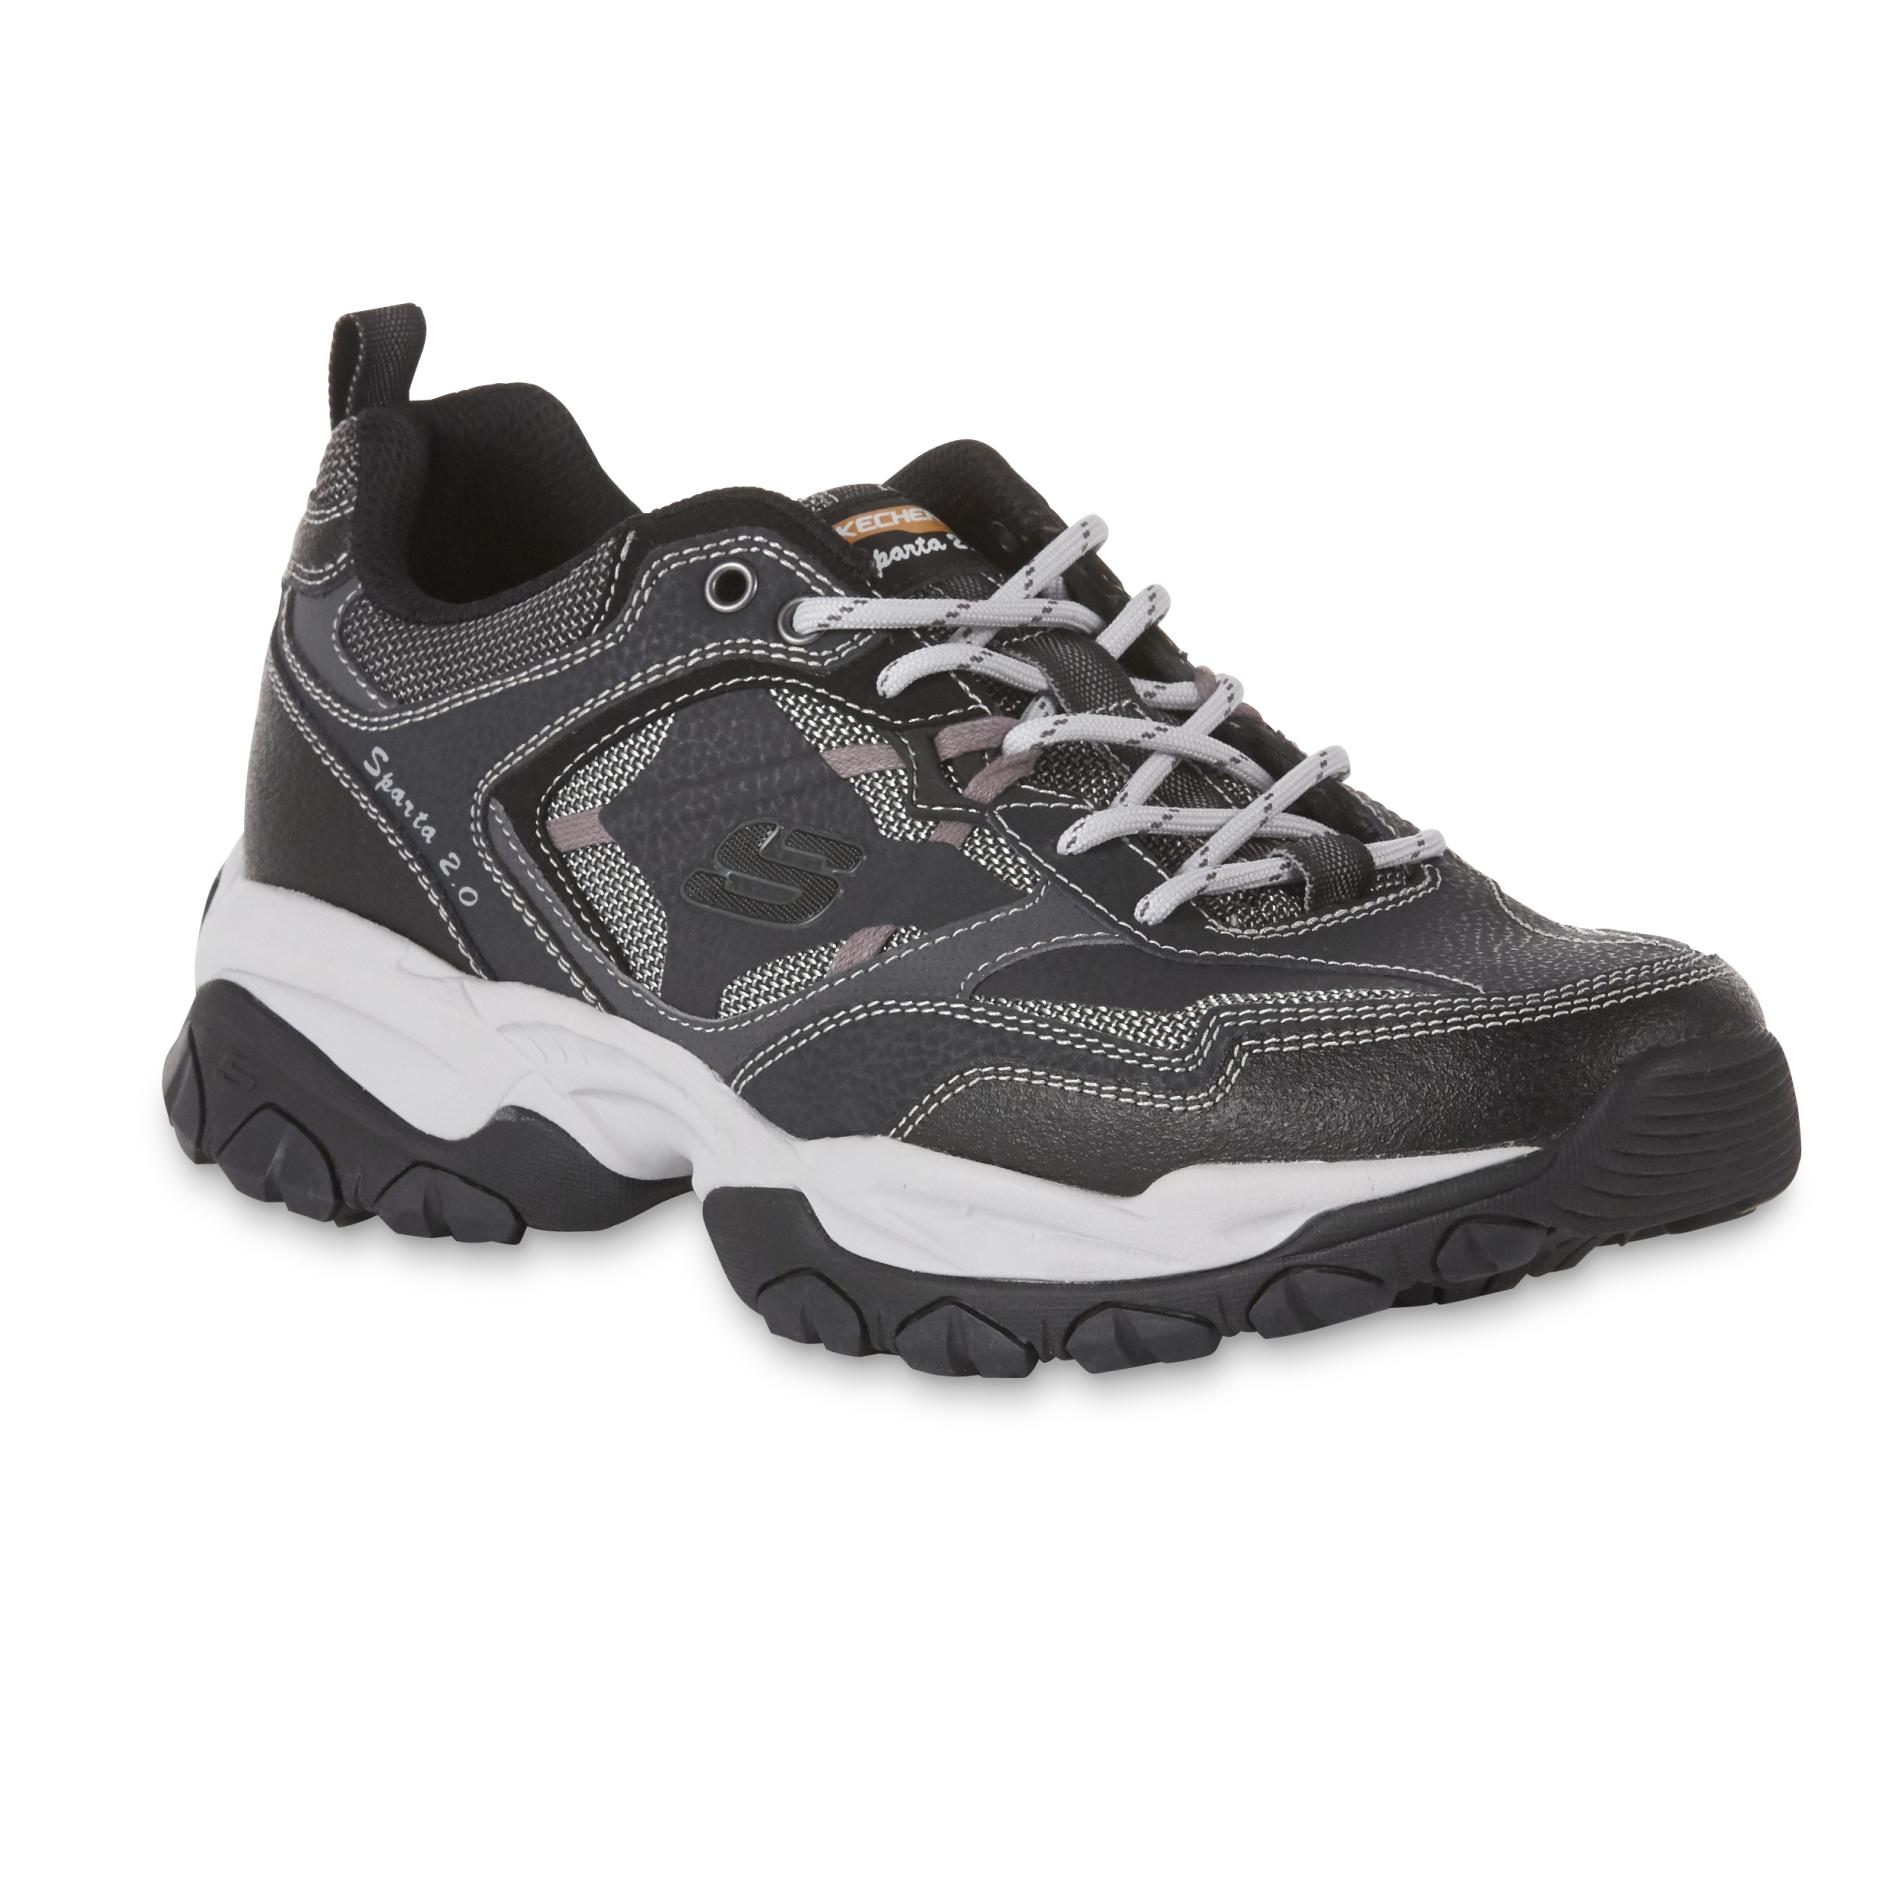 skechers sparta 2.0 review